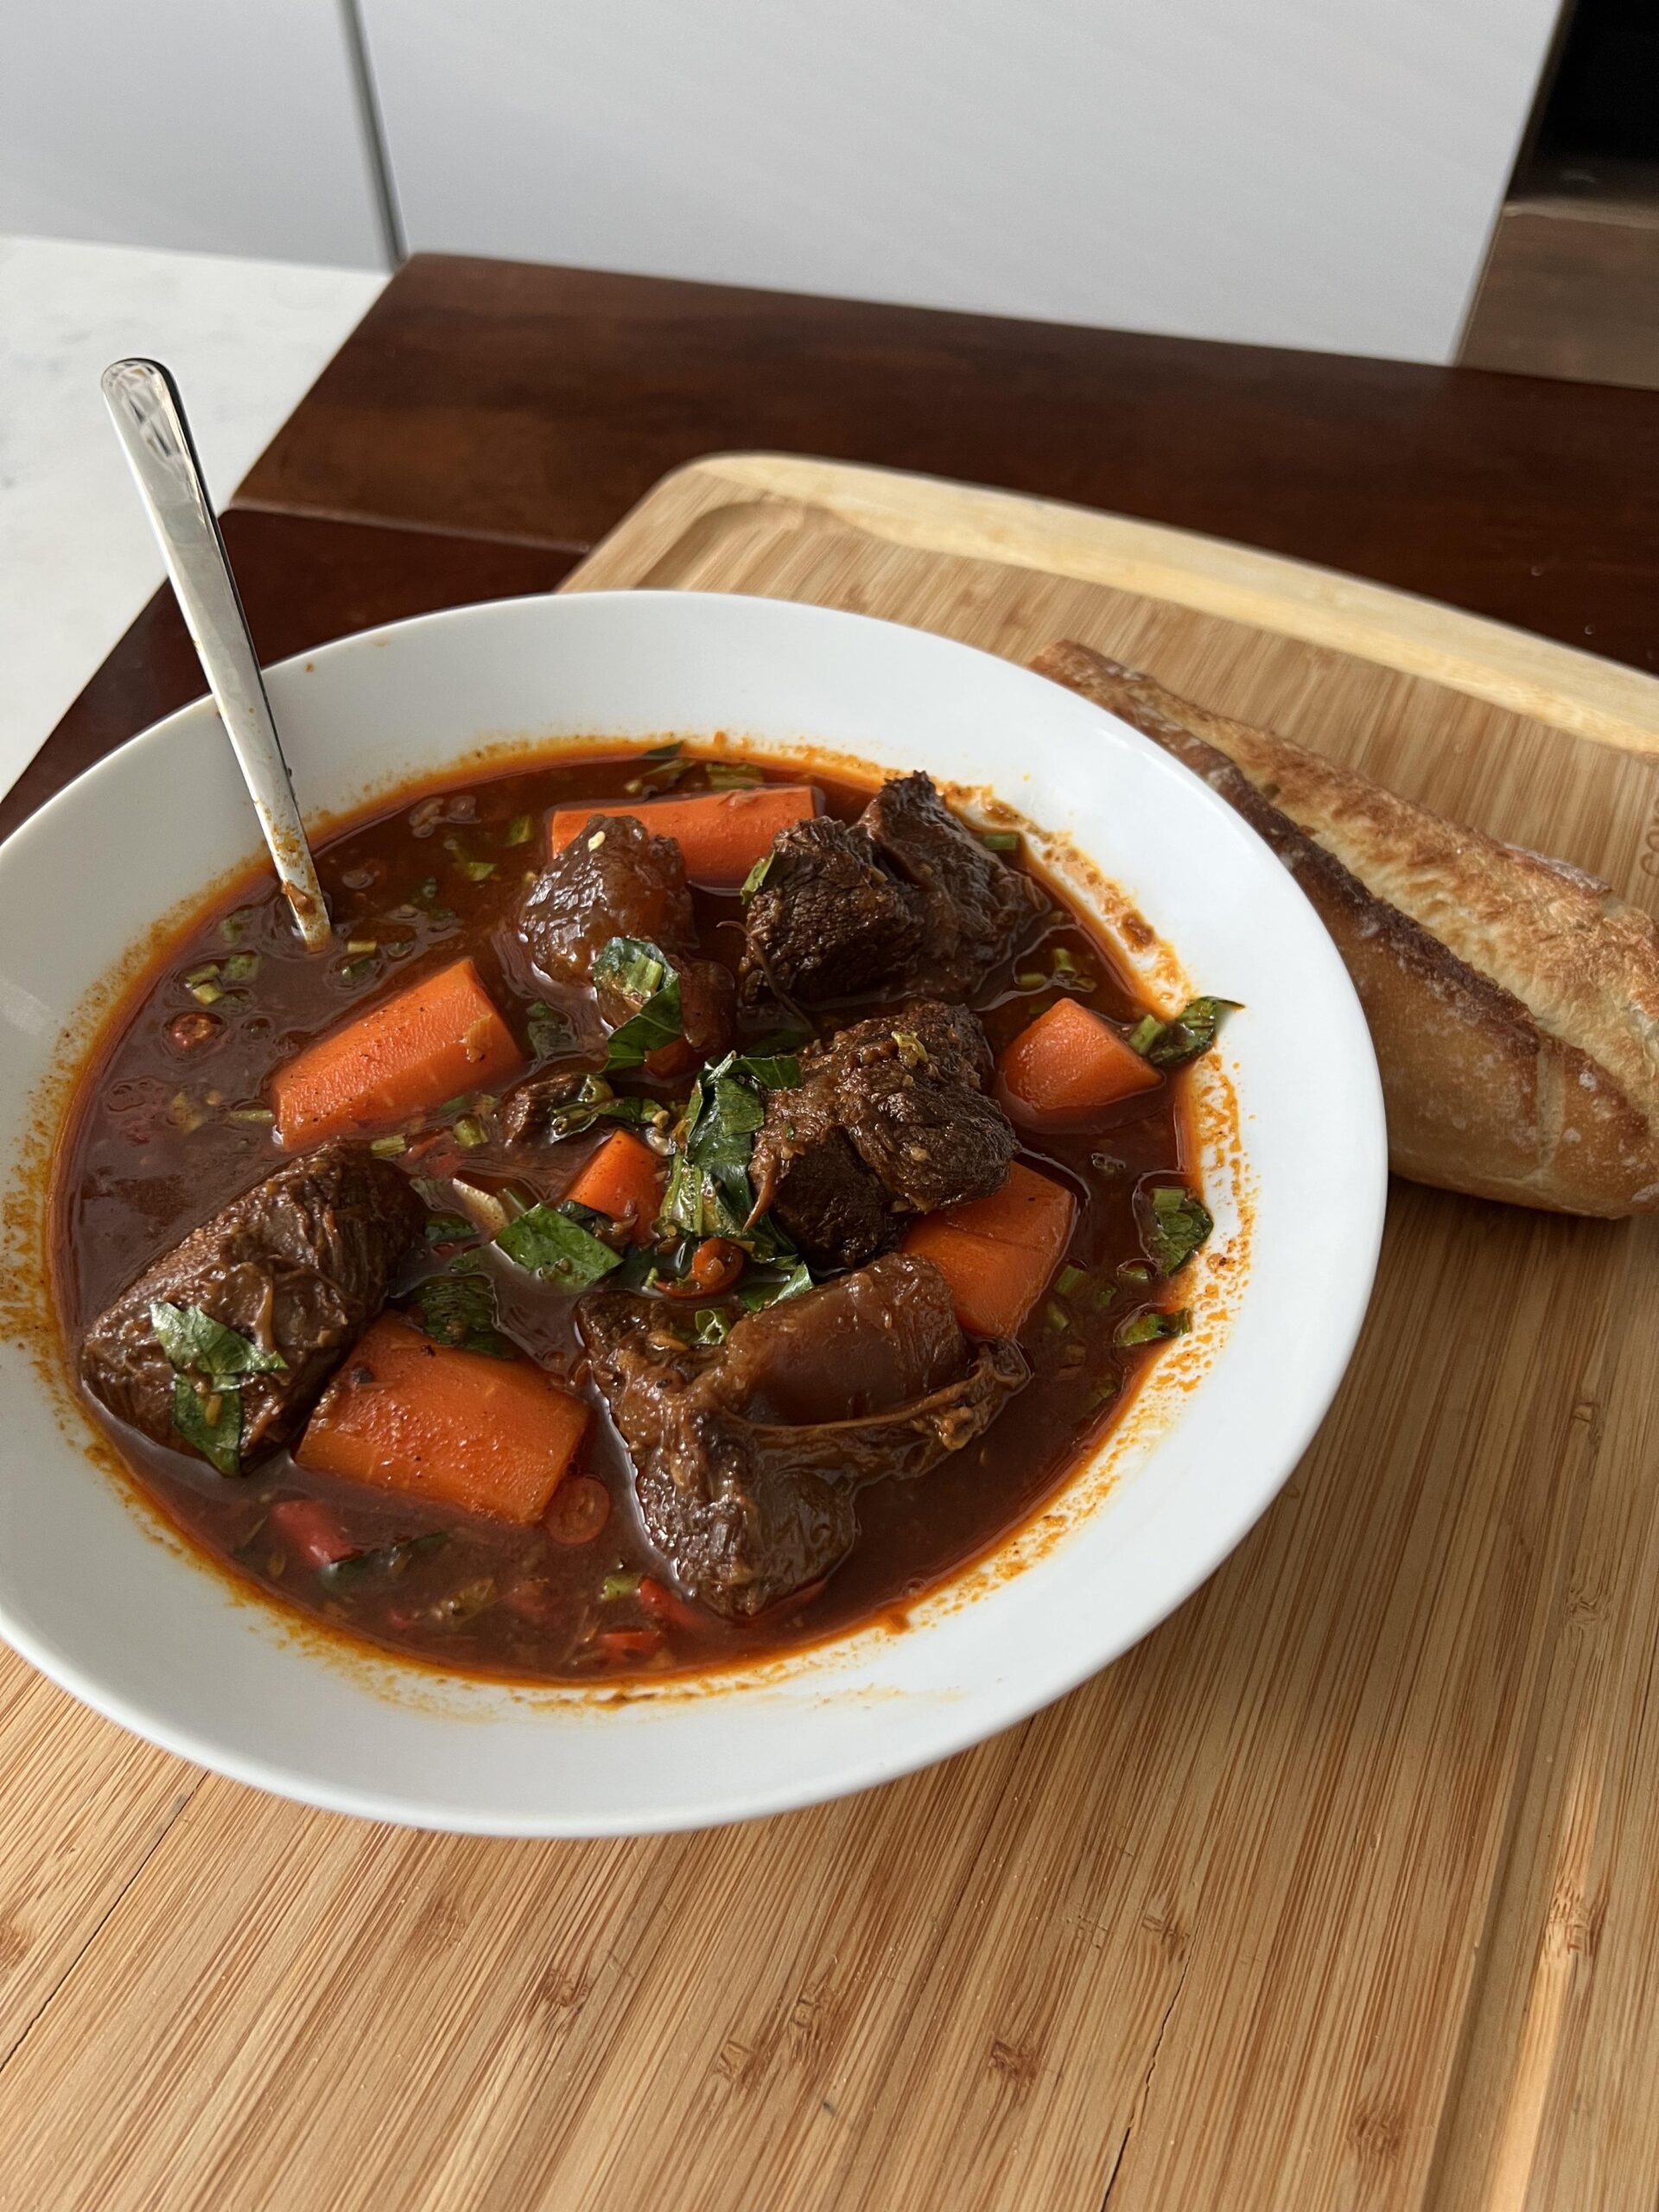 [Homemade] Bò kho (Vietnamese beef stew) - Dining and Cooking